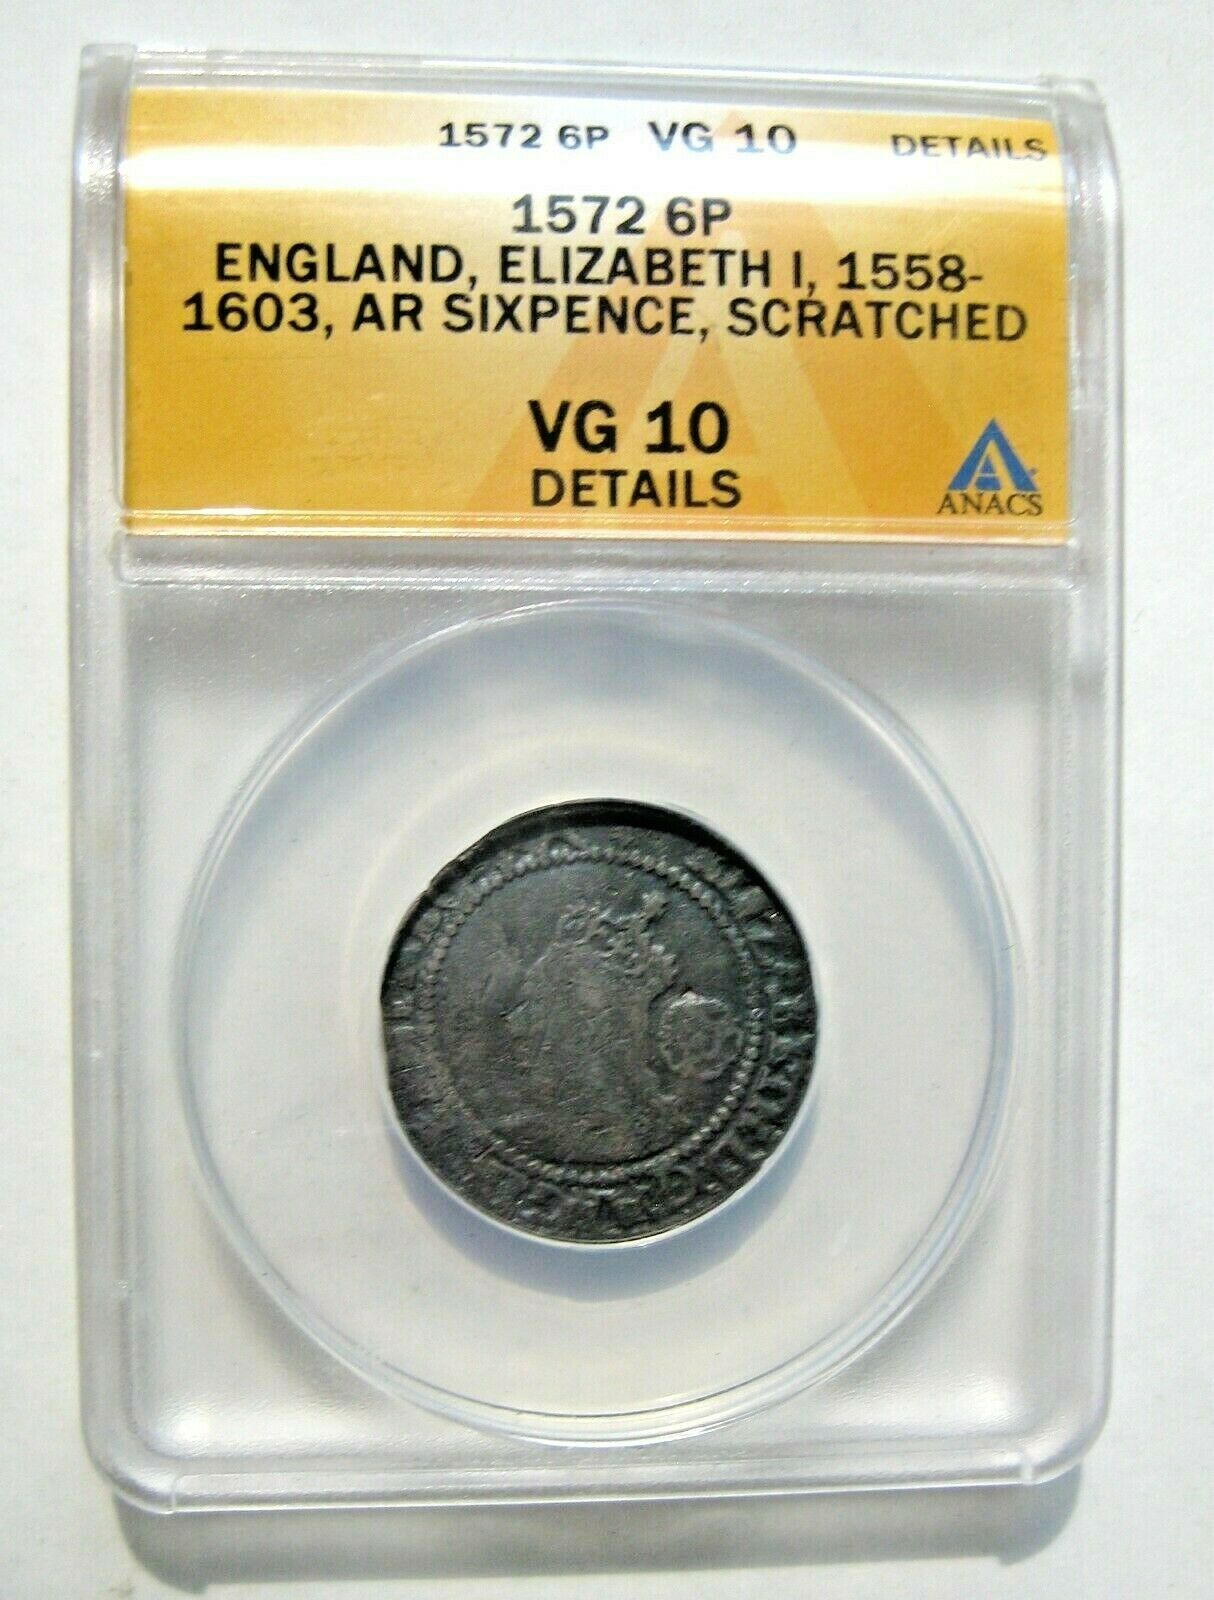 Anacs England 1572 Sixpence Elizabeth I Vg-10 Details Silver!! Scratched